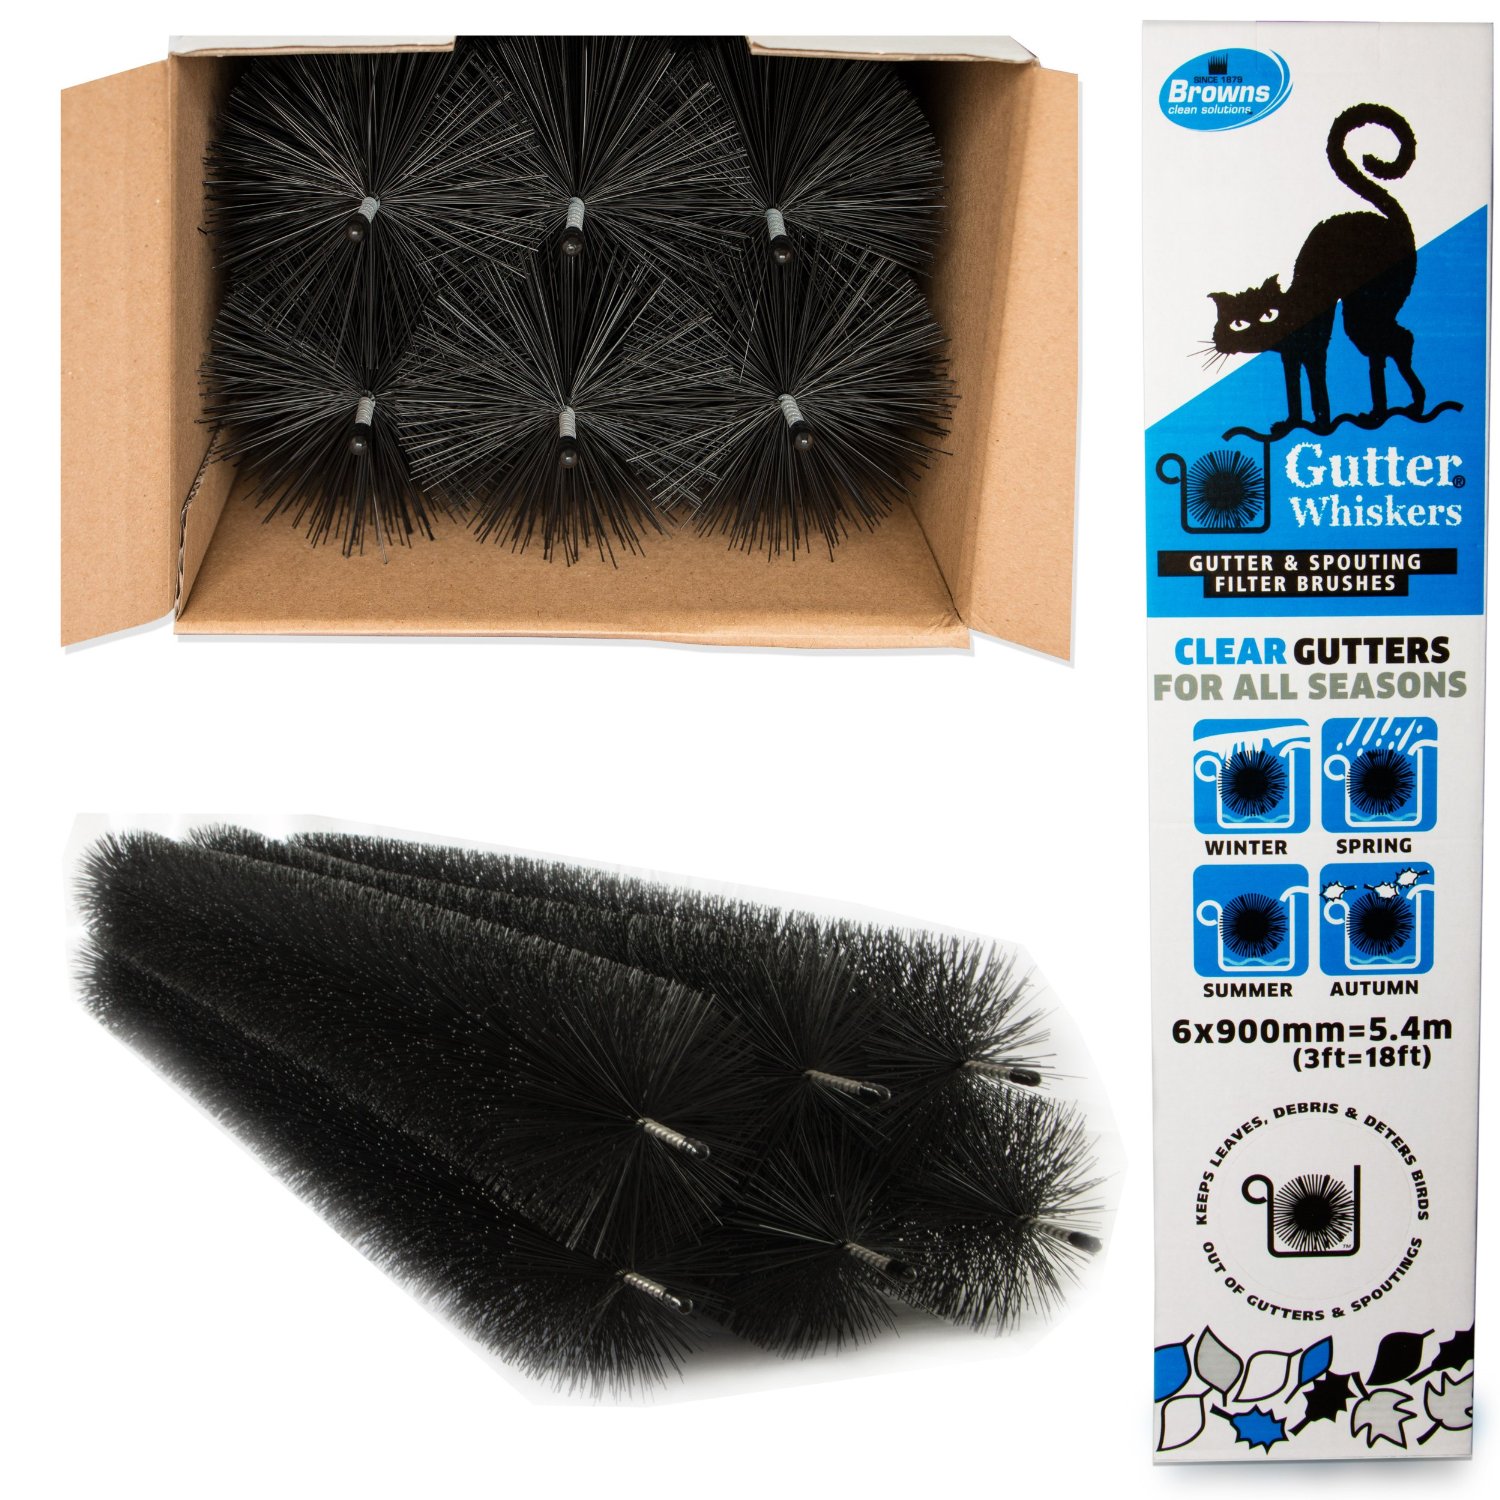 gutter whiskers guards brushes spouting filter meter pack cleaning brush guard tool